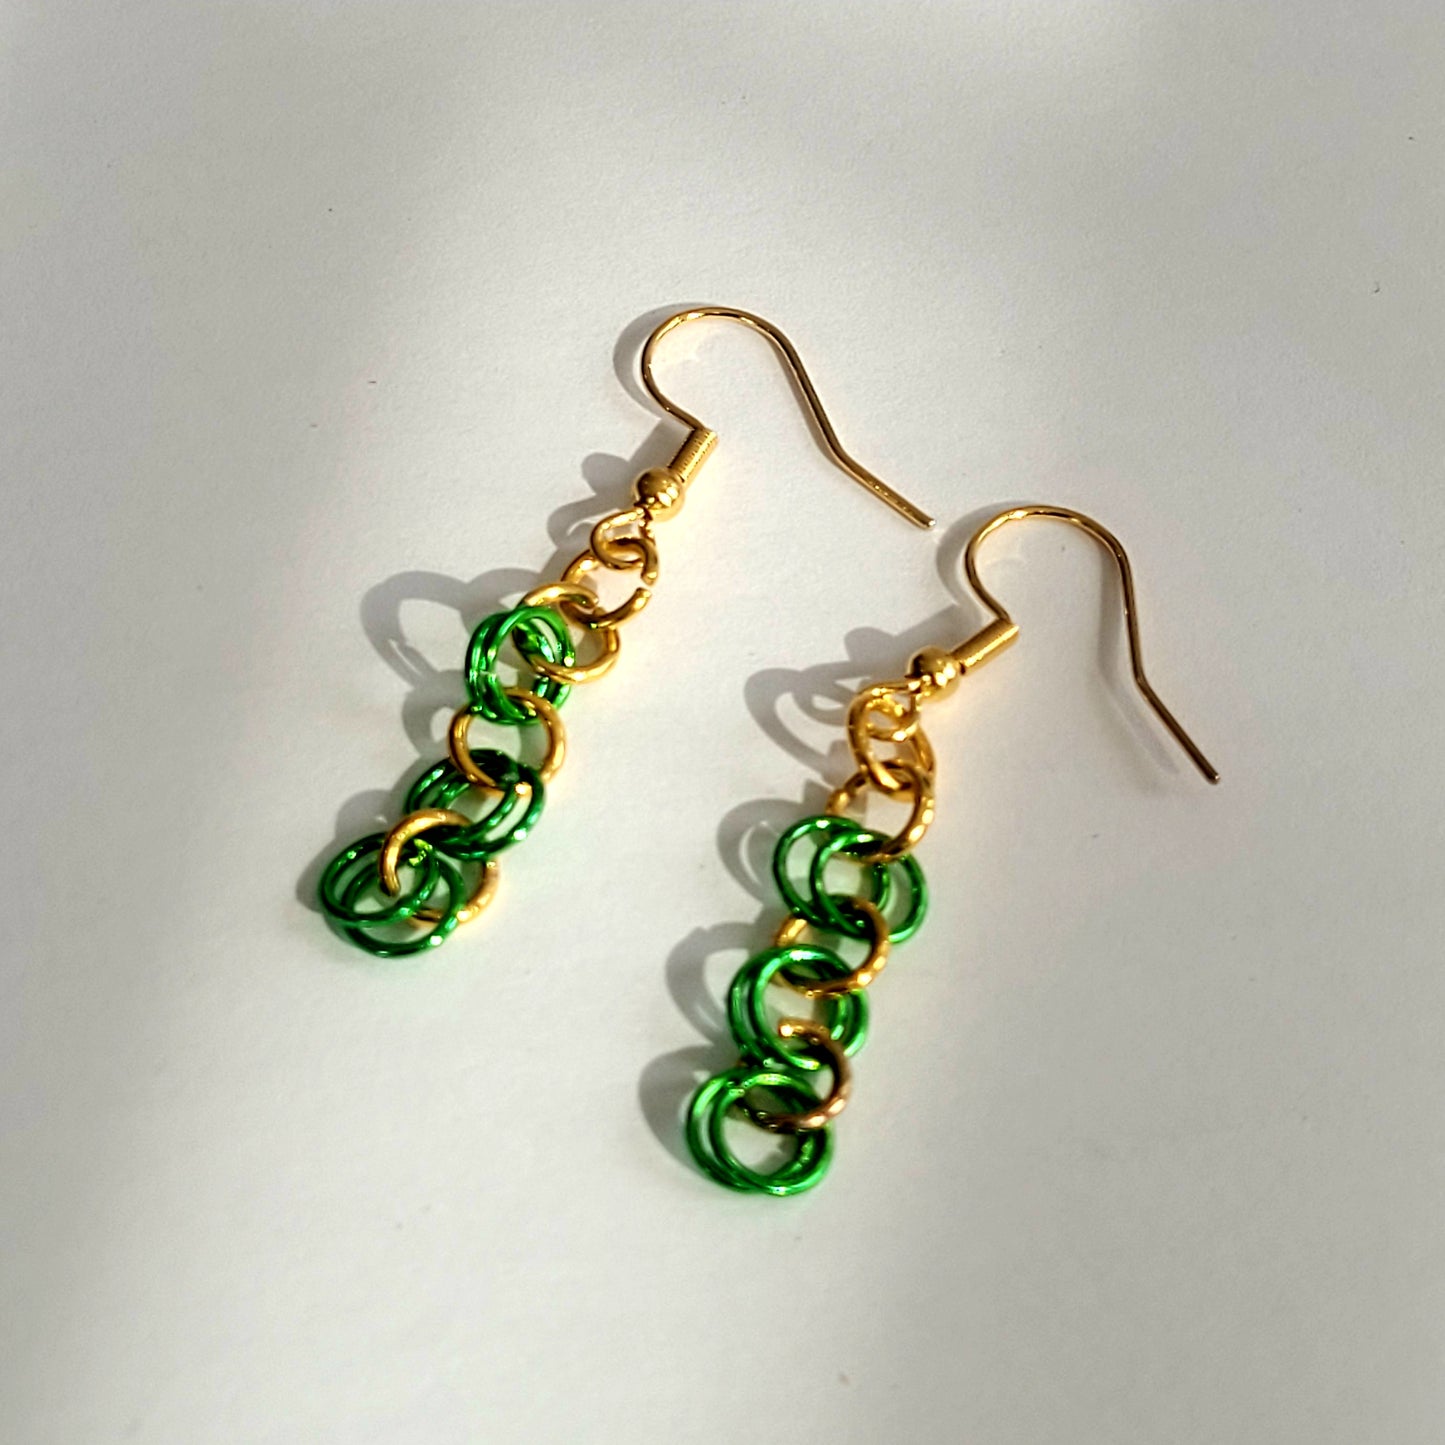 Earrings, green and gold chainmail